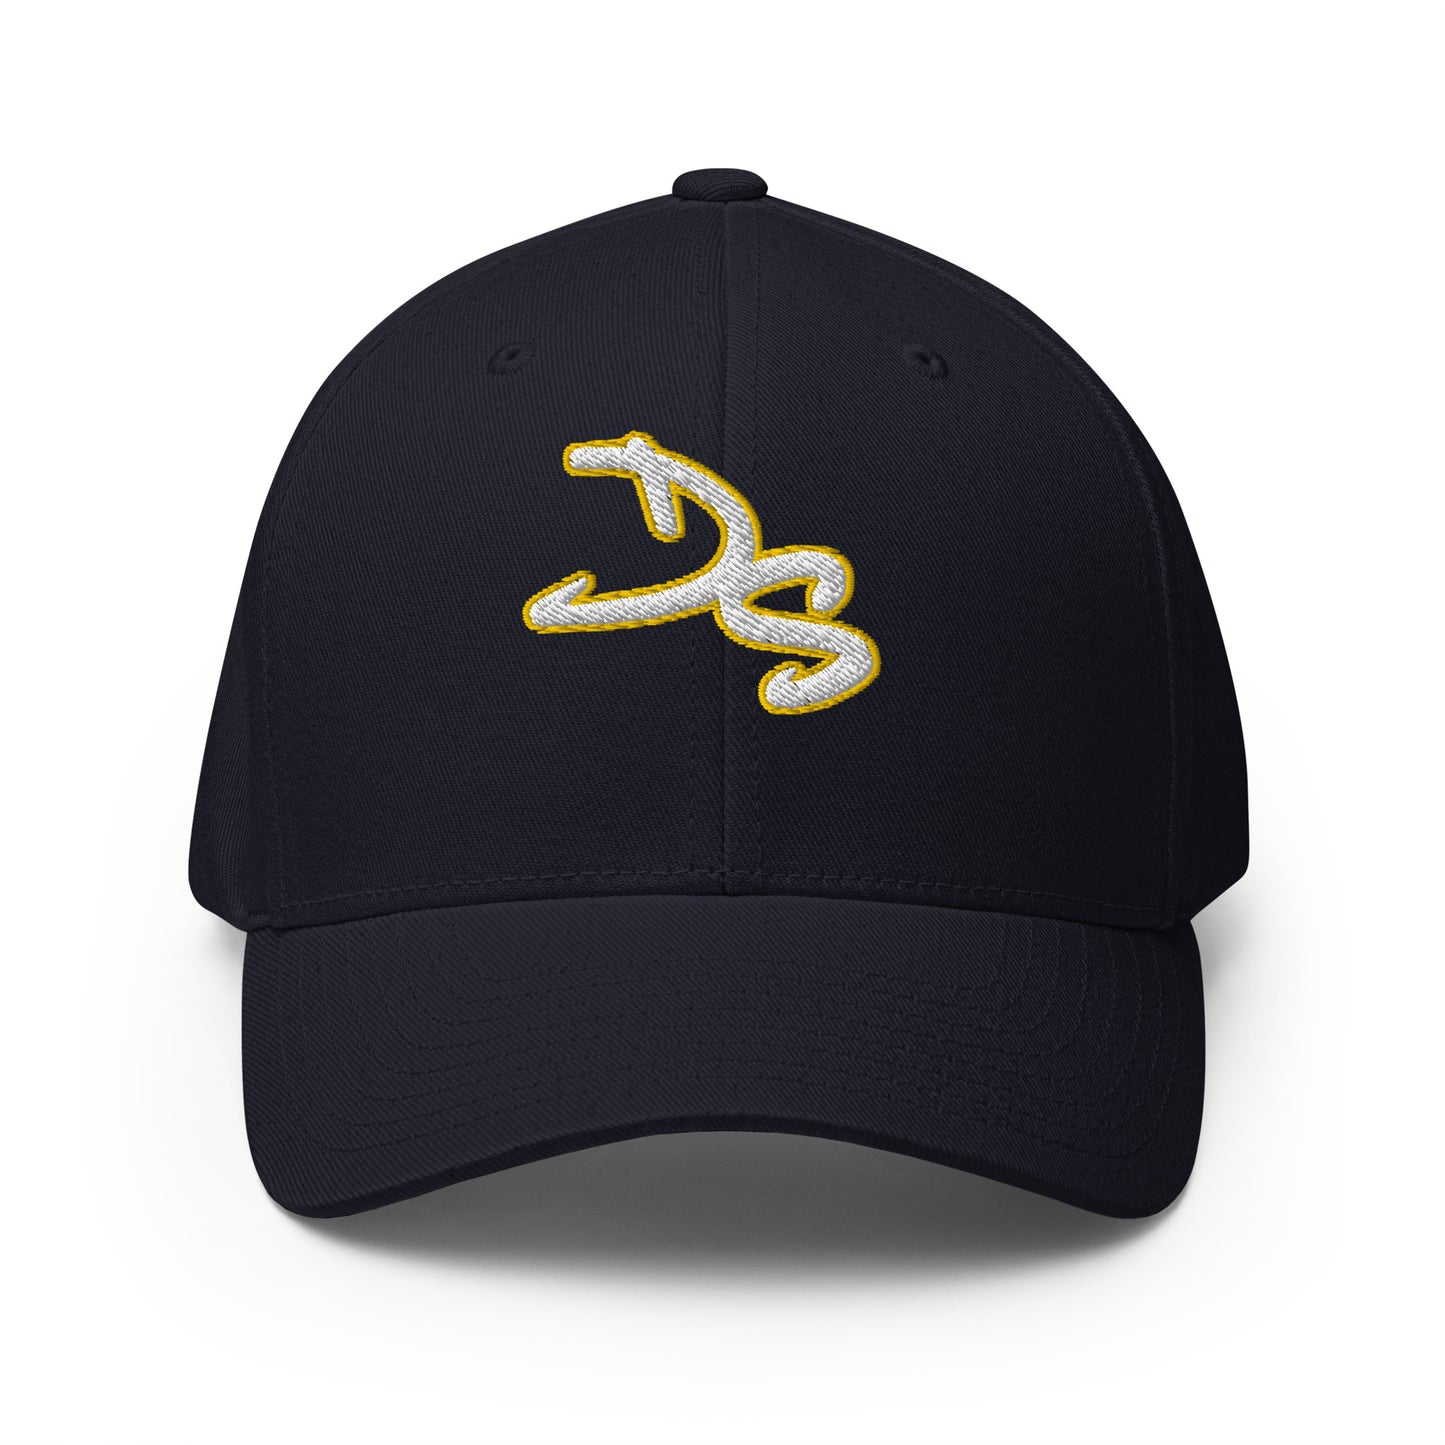 Don Sy Initials Structured Twill Cap